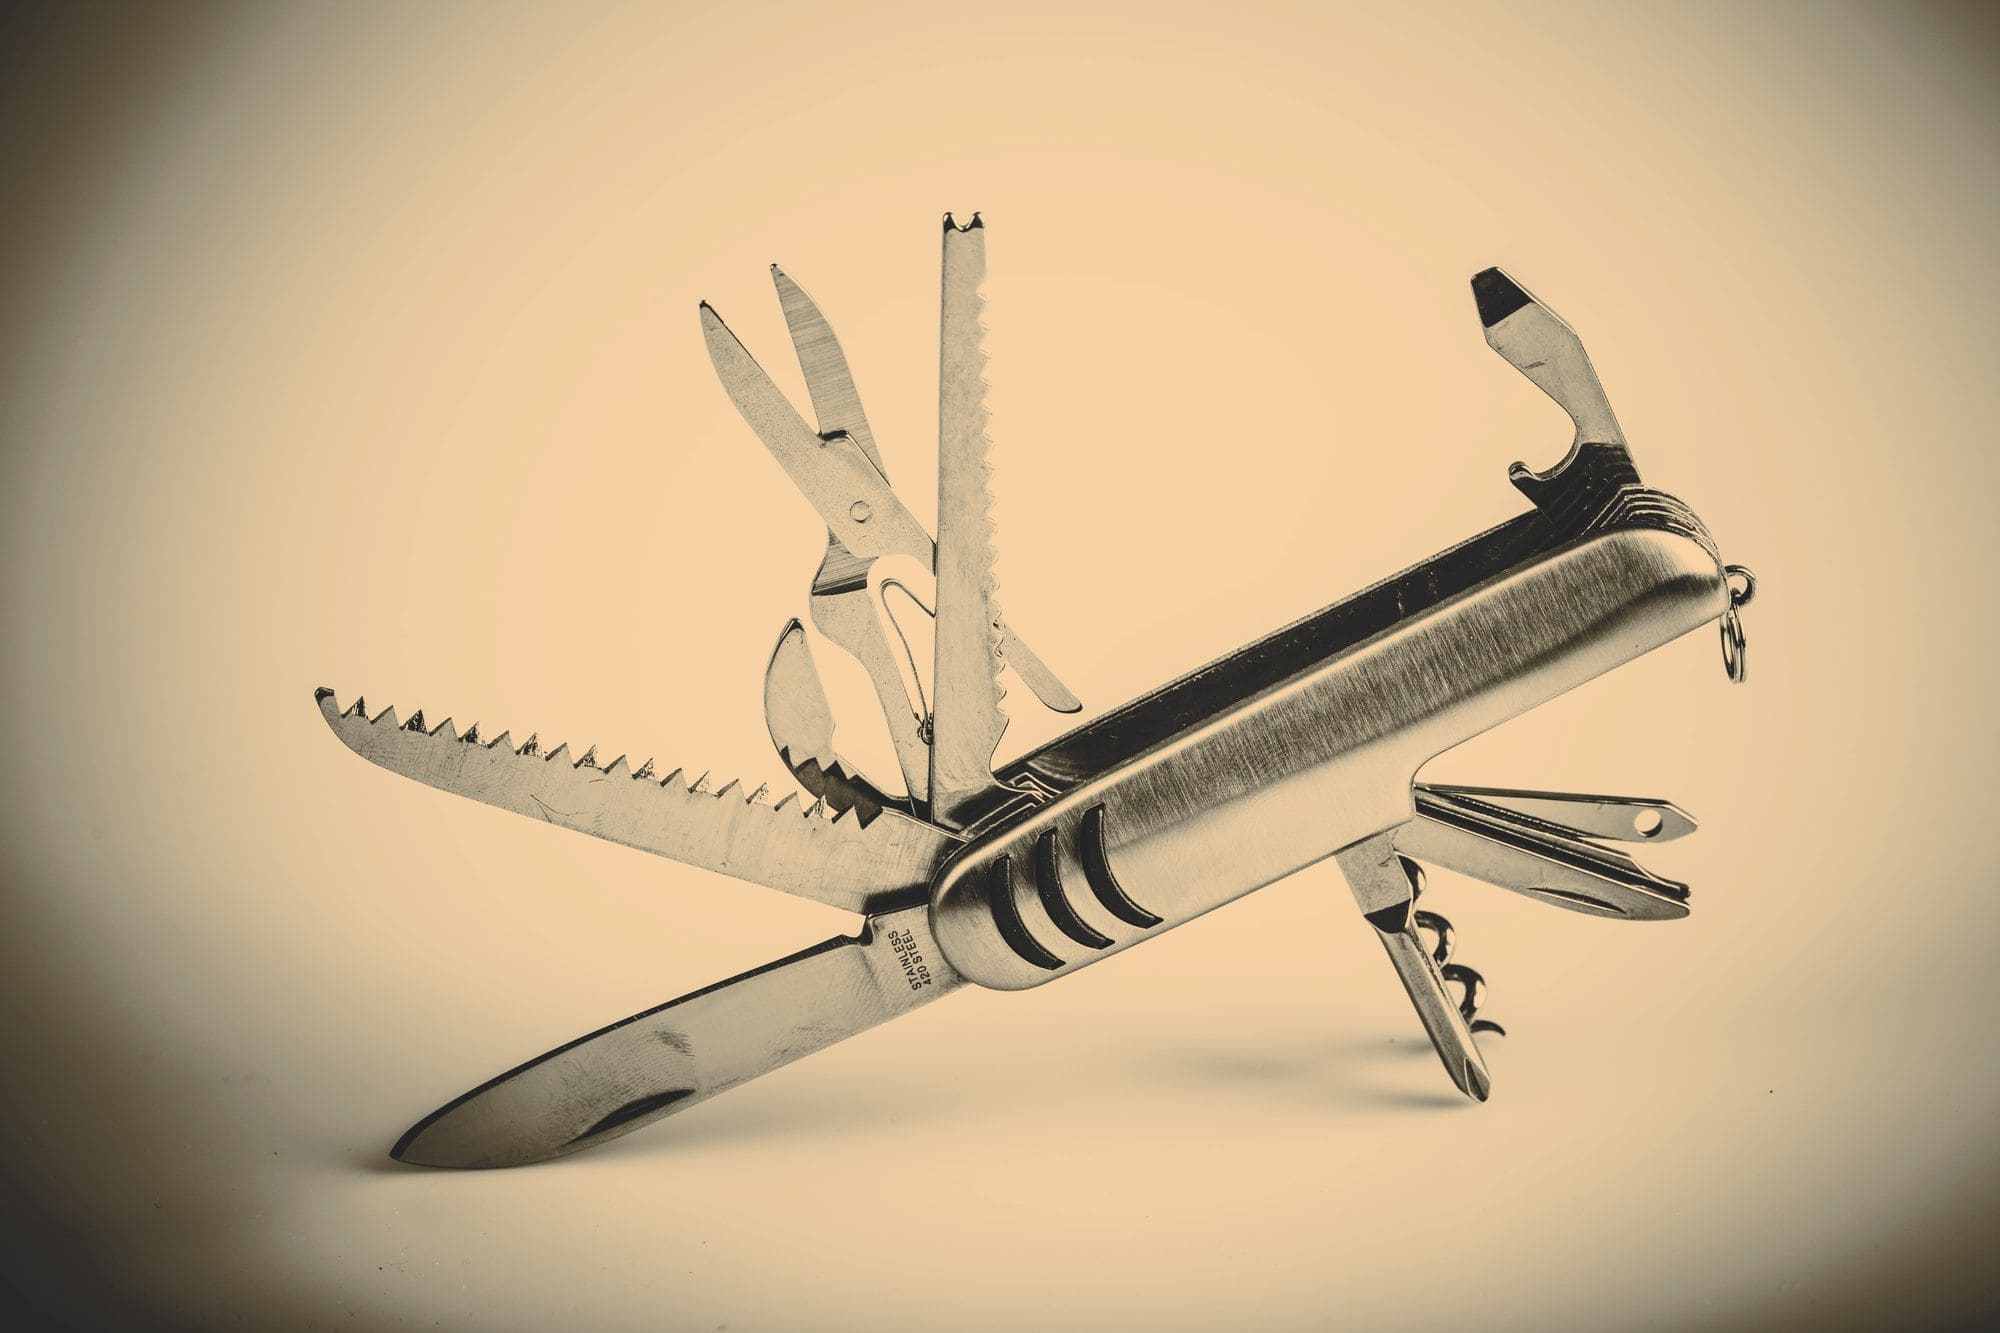 The Steel Victorinox Swiss Knife: On the Cutting Edge of Victory